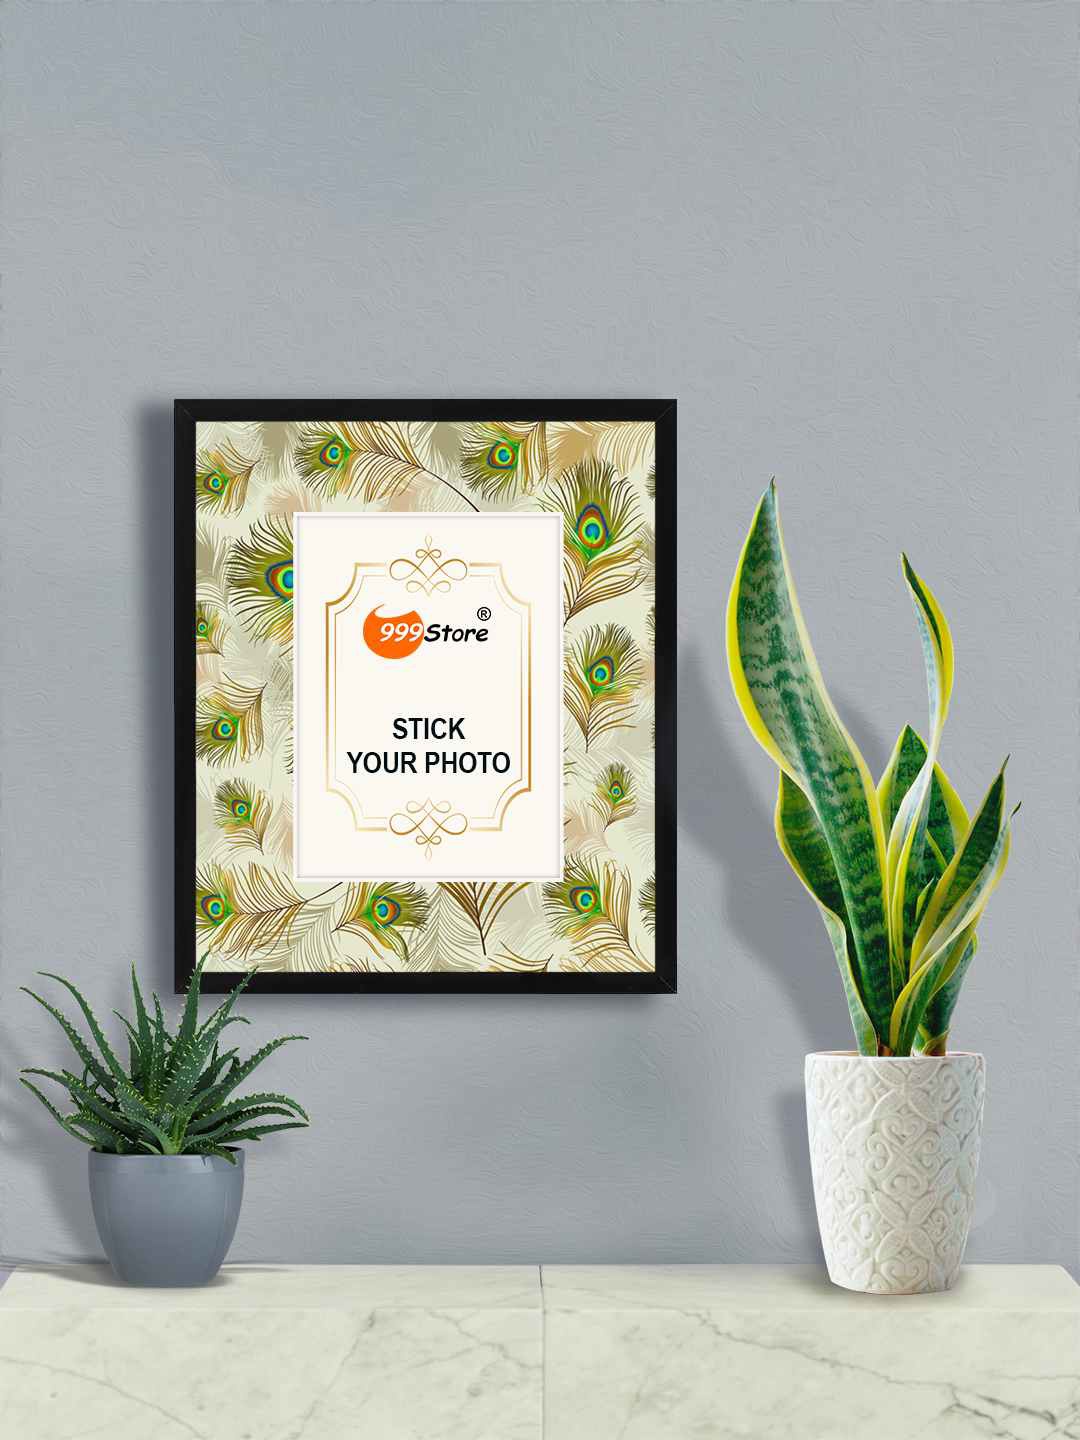 

999Store Green Peacock Feather Printed Photo Frame